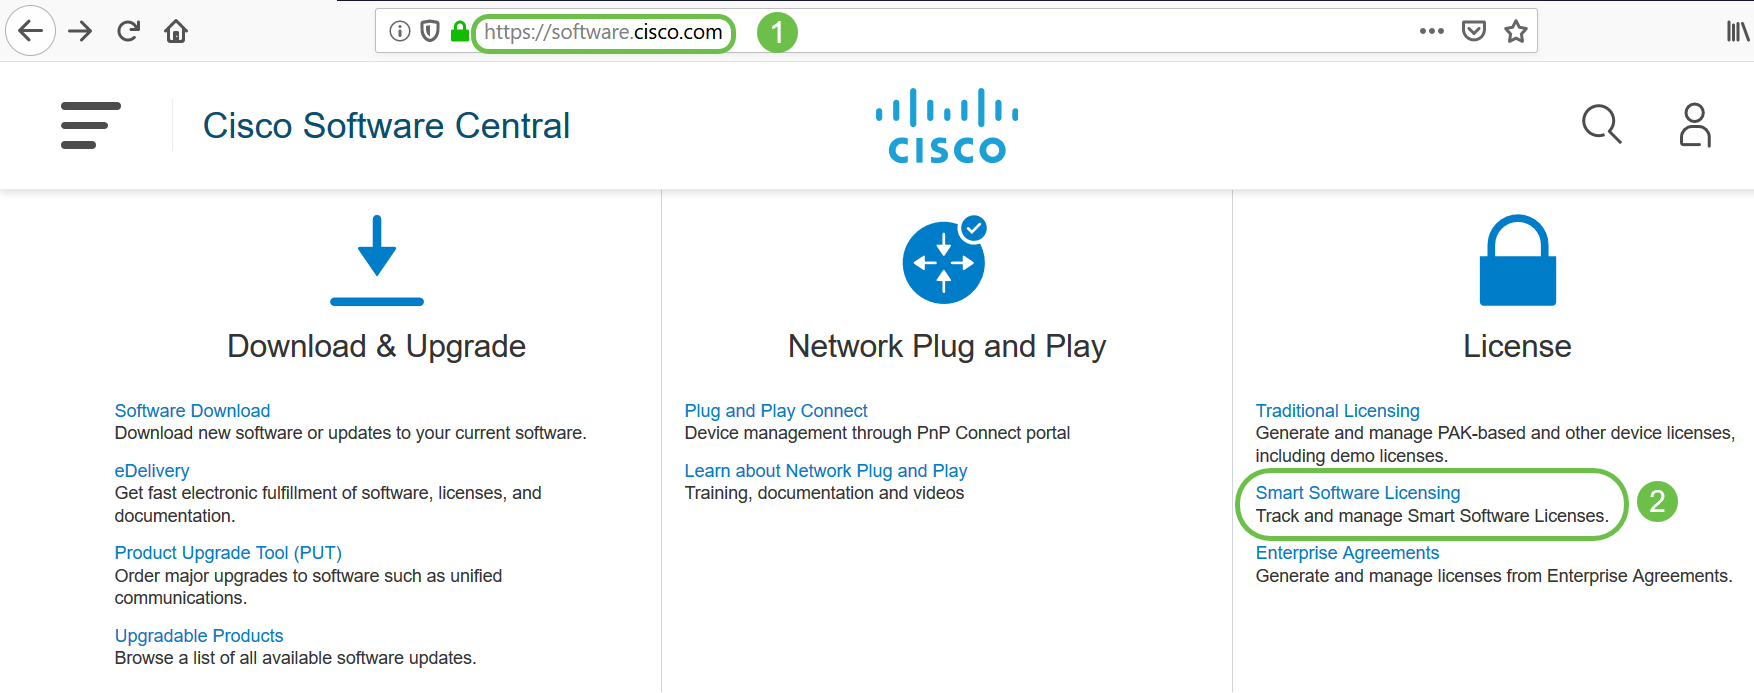 Access Cisco Software and navigate to Smart Software Licensing.